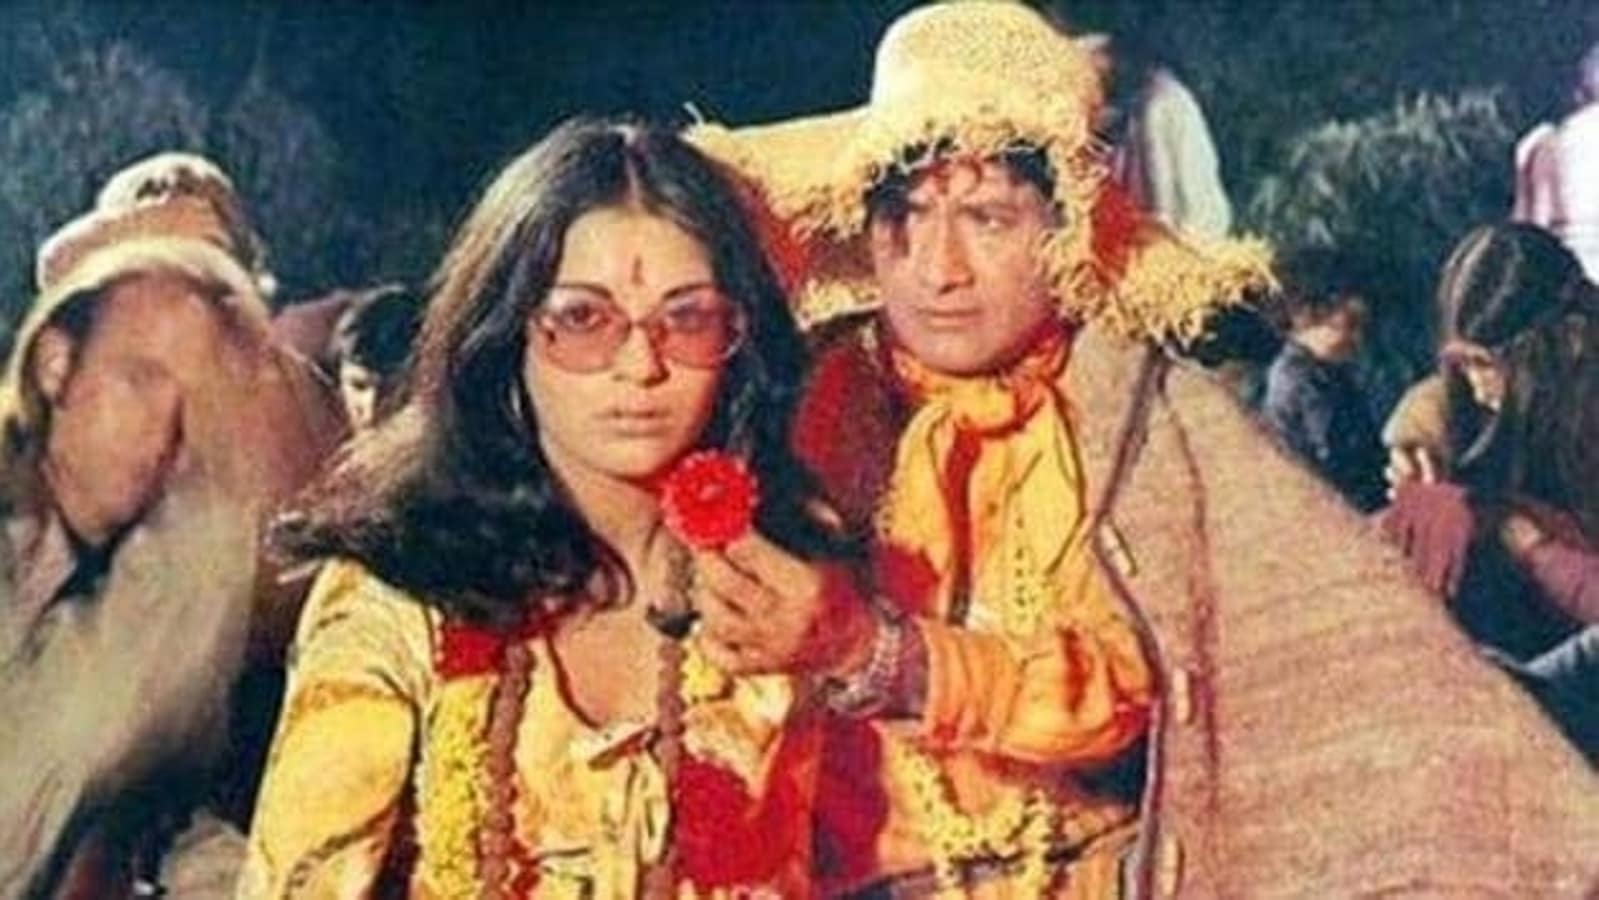 Zeenat Aman says she was accepted by audience even when she played drug-addict: ‘Writers wrote parts for me’